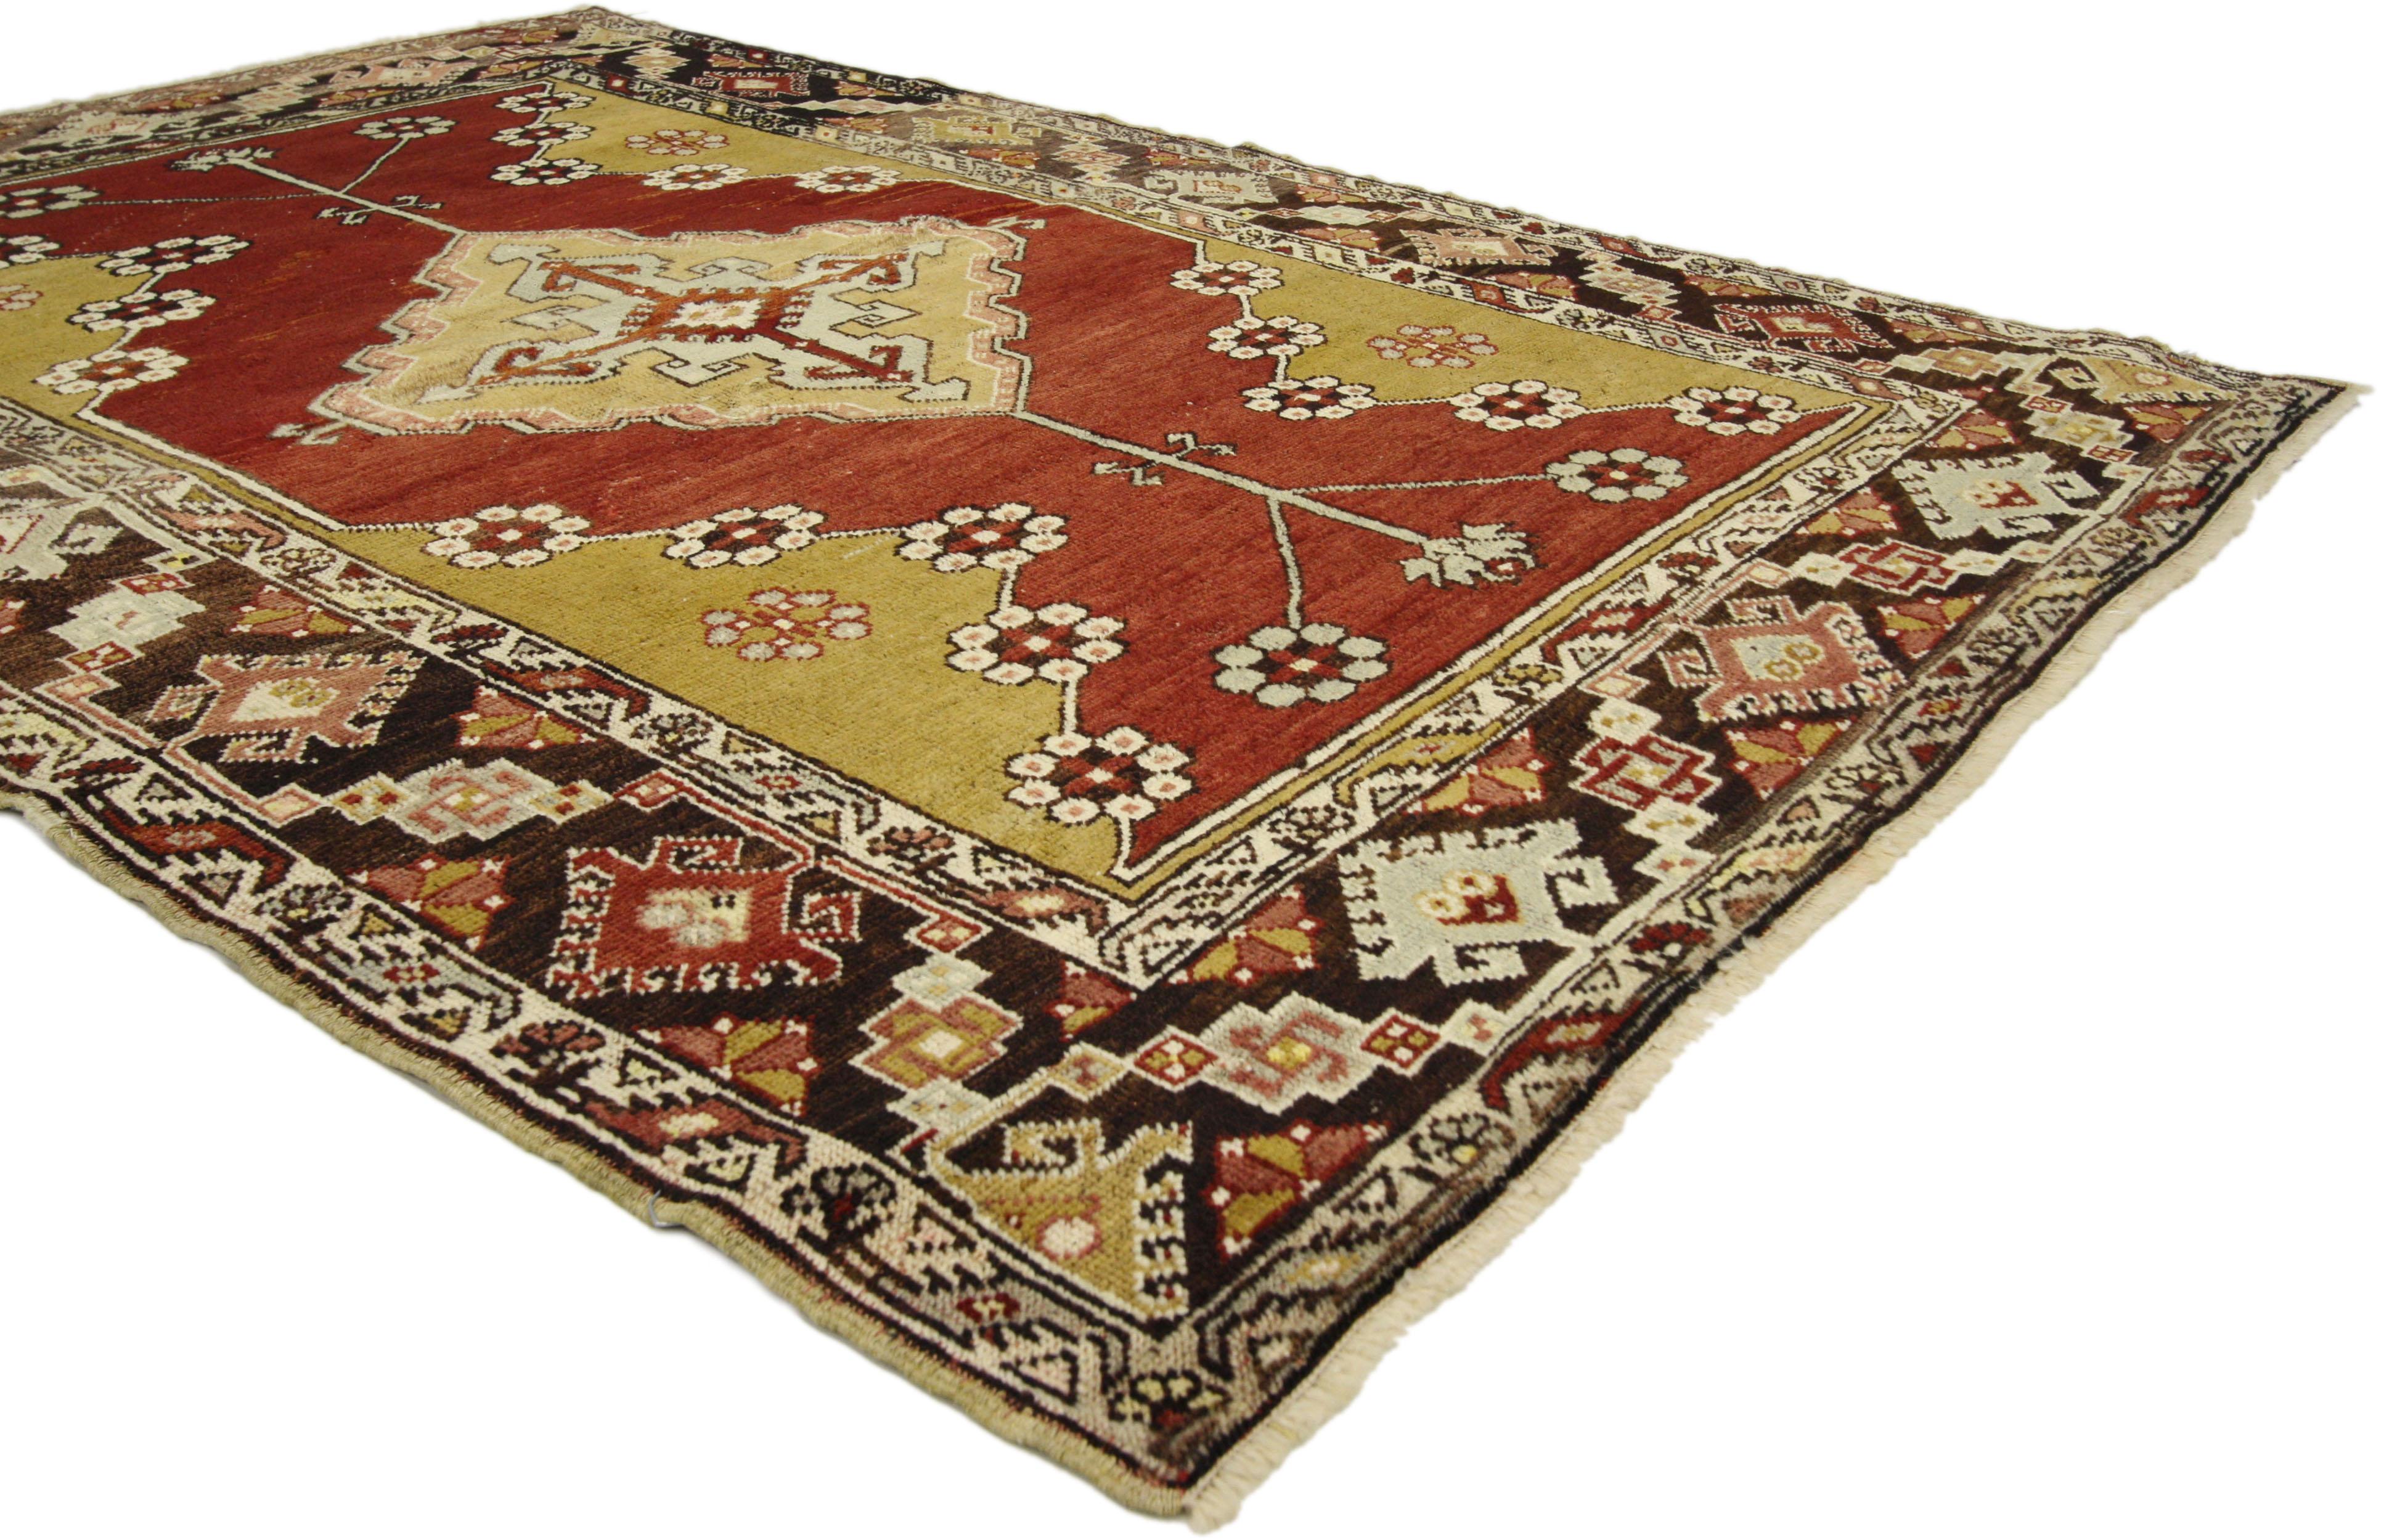 73835 Vintage Turkish Oushak accent rug with Jacobean style, entry or Foyer rug. This hand knotted wool vintage Turkish Oushak rug appears like a sumptuous Italian cut velvet, recalling the rich and luxurious design furnishings of a bygone era such